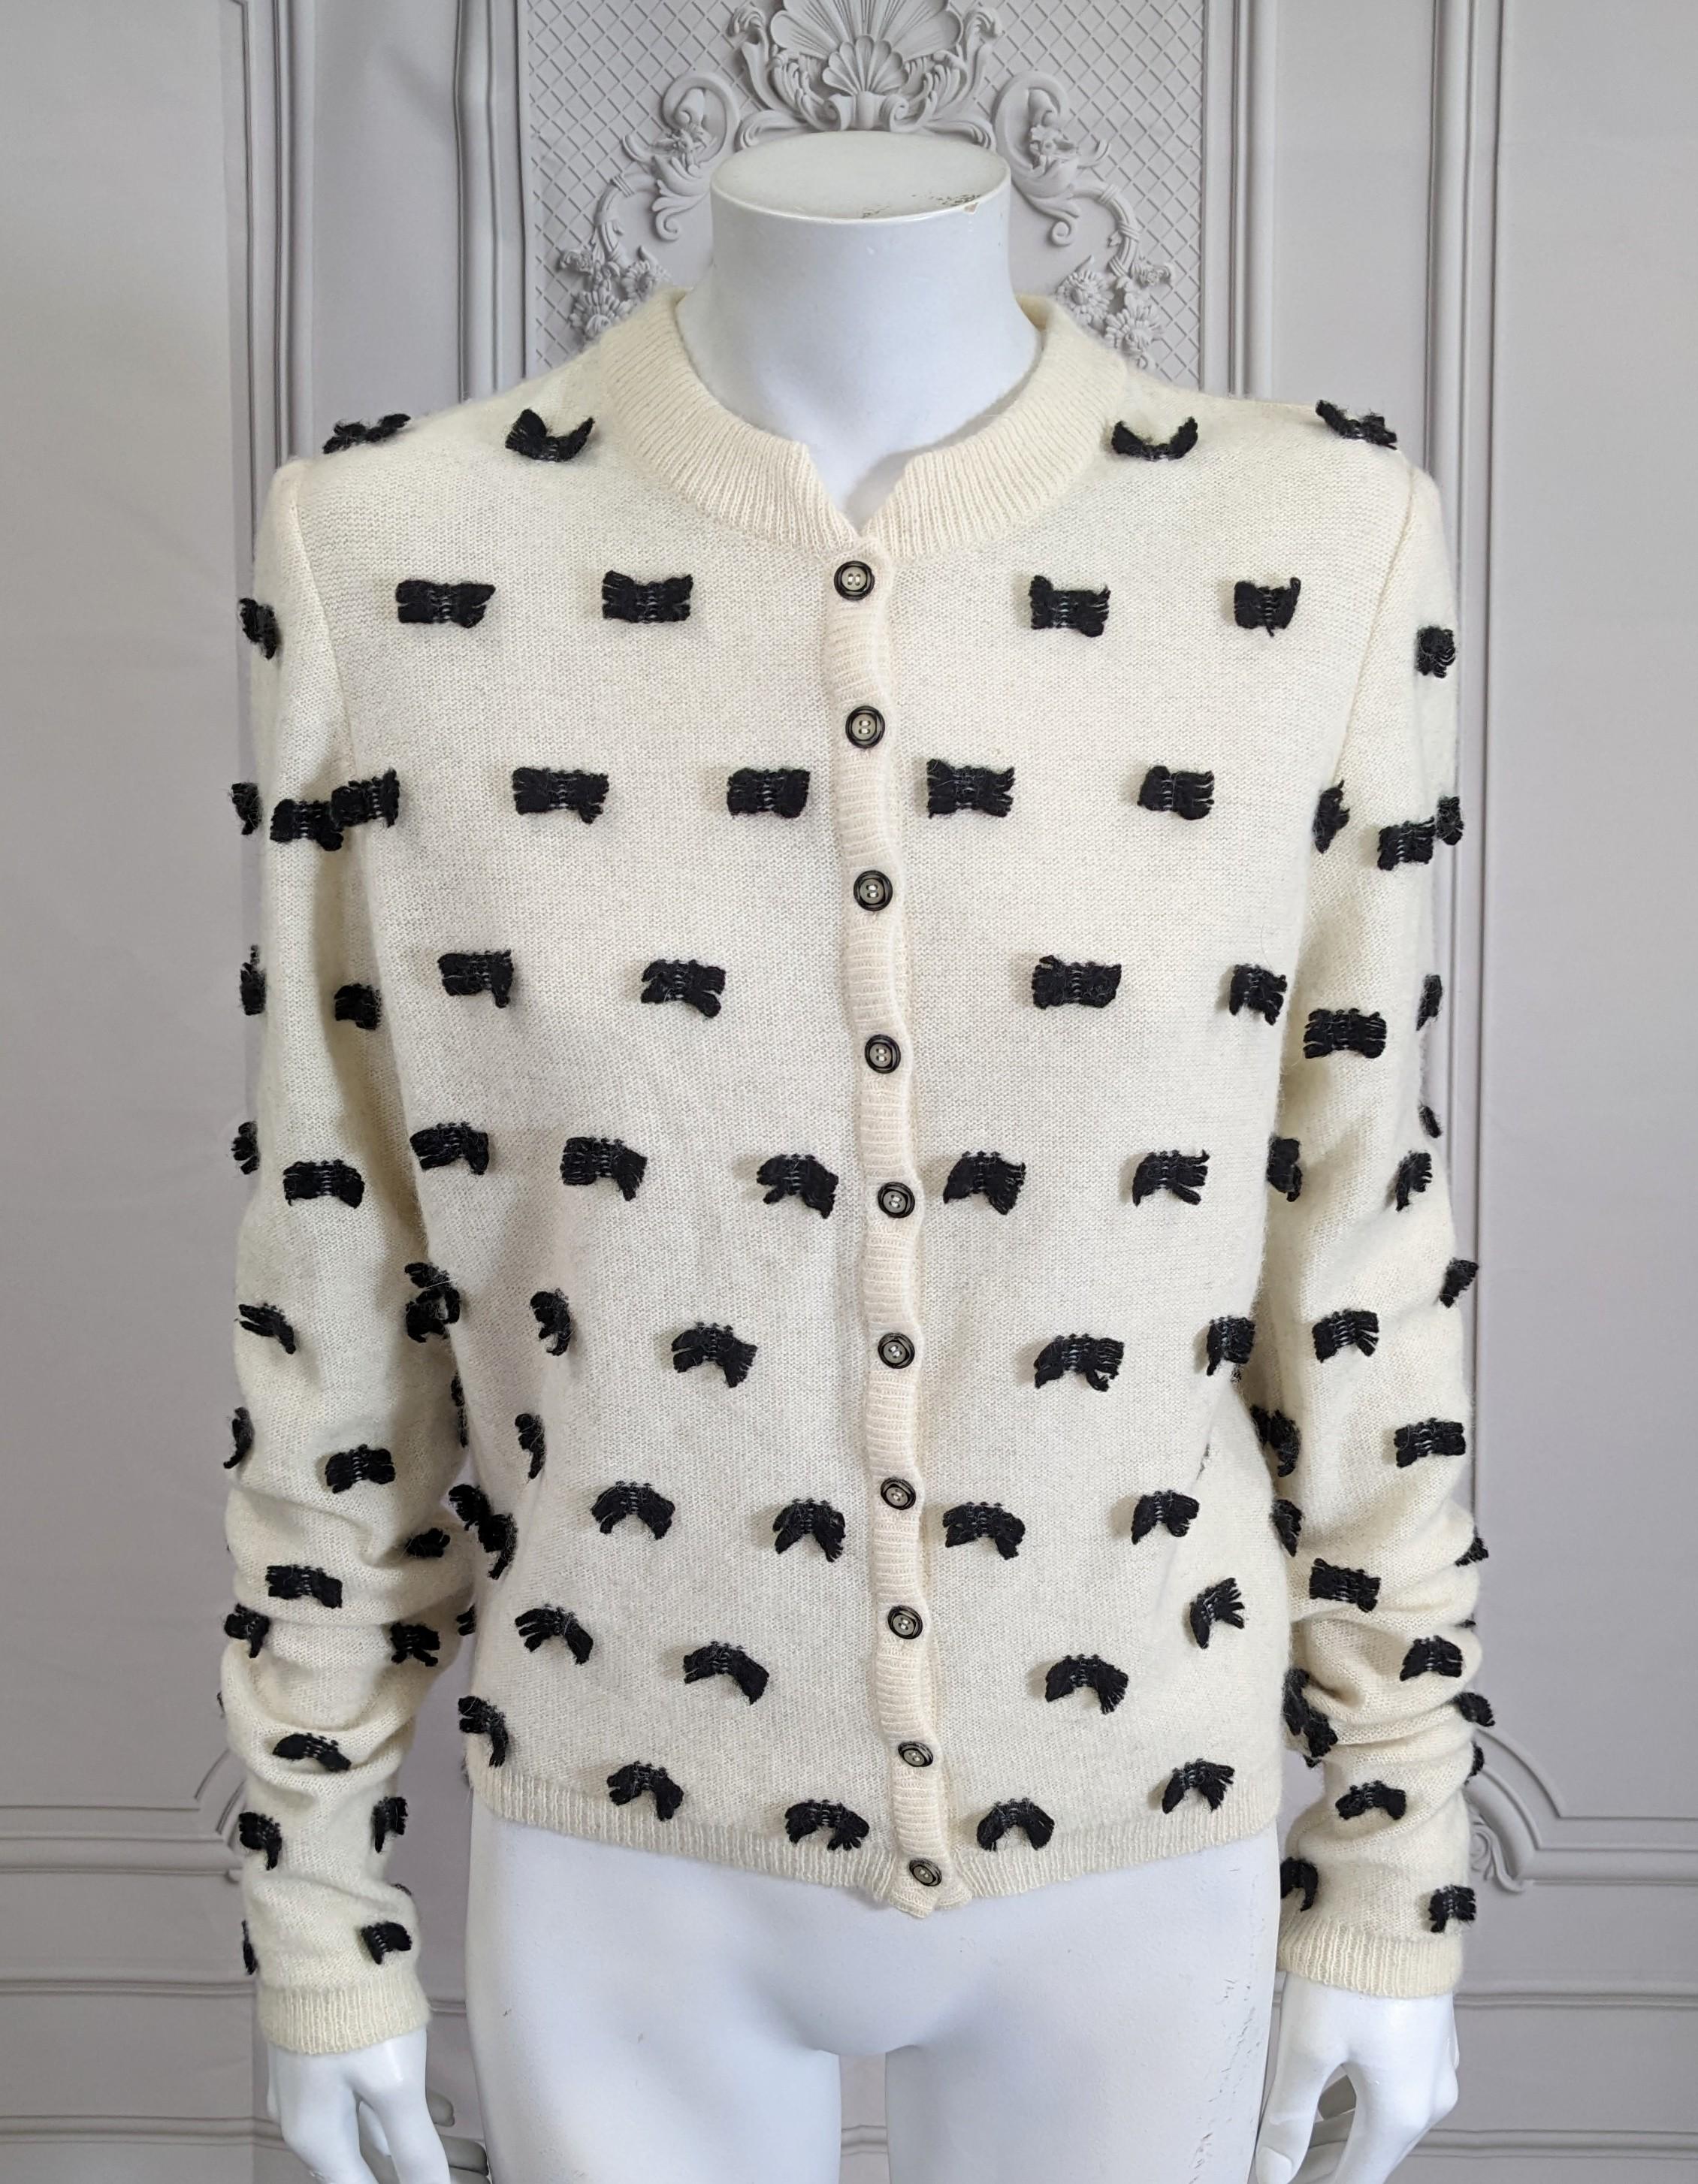 John Galliano  Spring/Summer 1998 -99 ladylike ivory and black wool blend long sleeve cardigan sweater. The cardigans ivory ground overall embellished with small black wool bows.
Excellent Condition, Size Medium, Made in Italy.